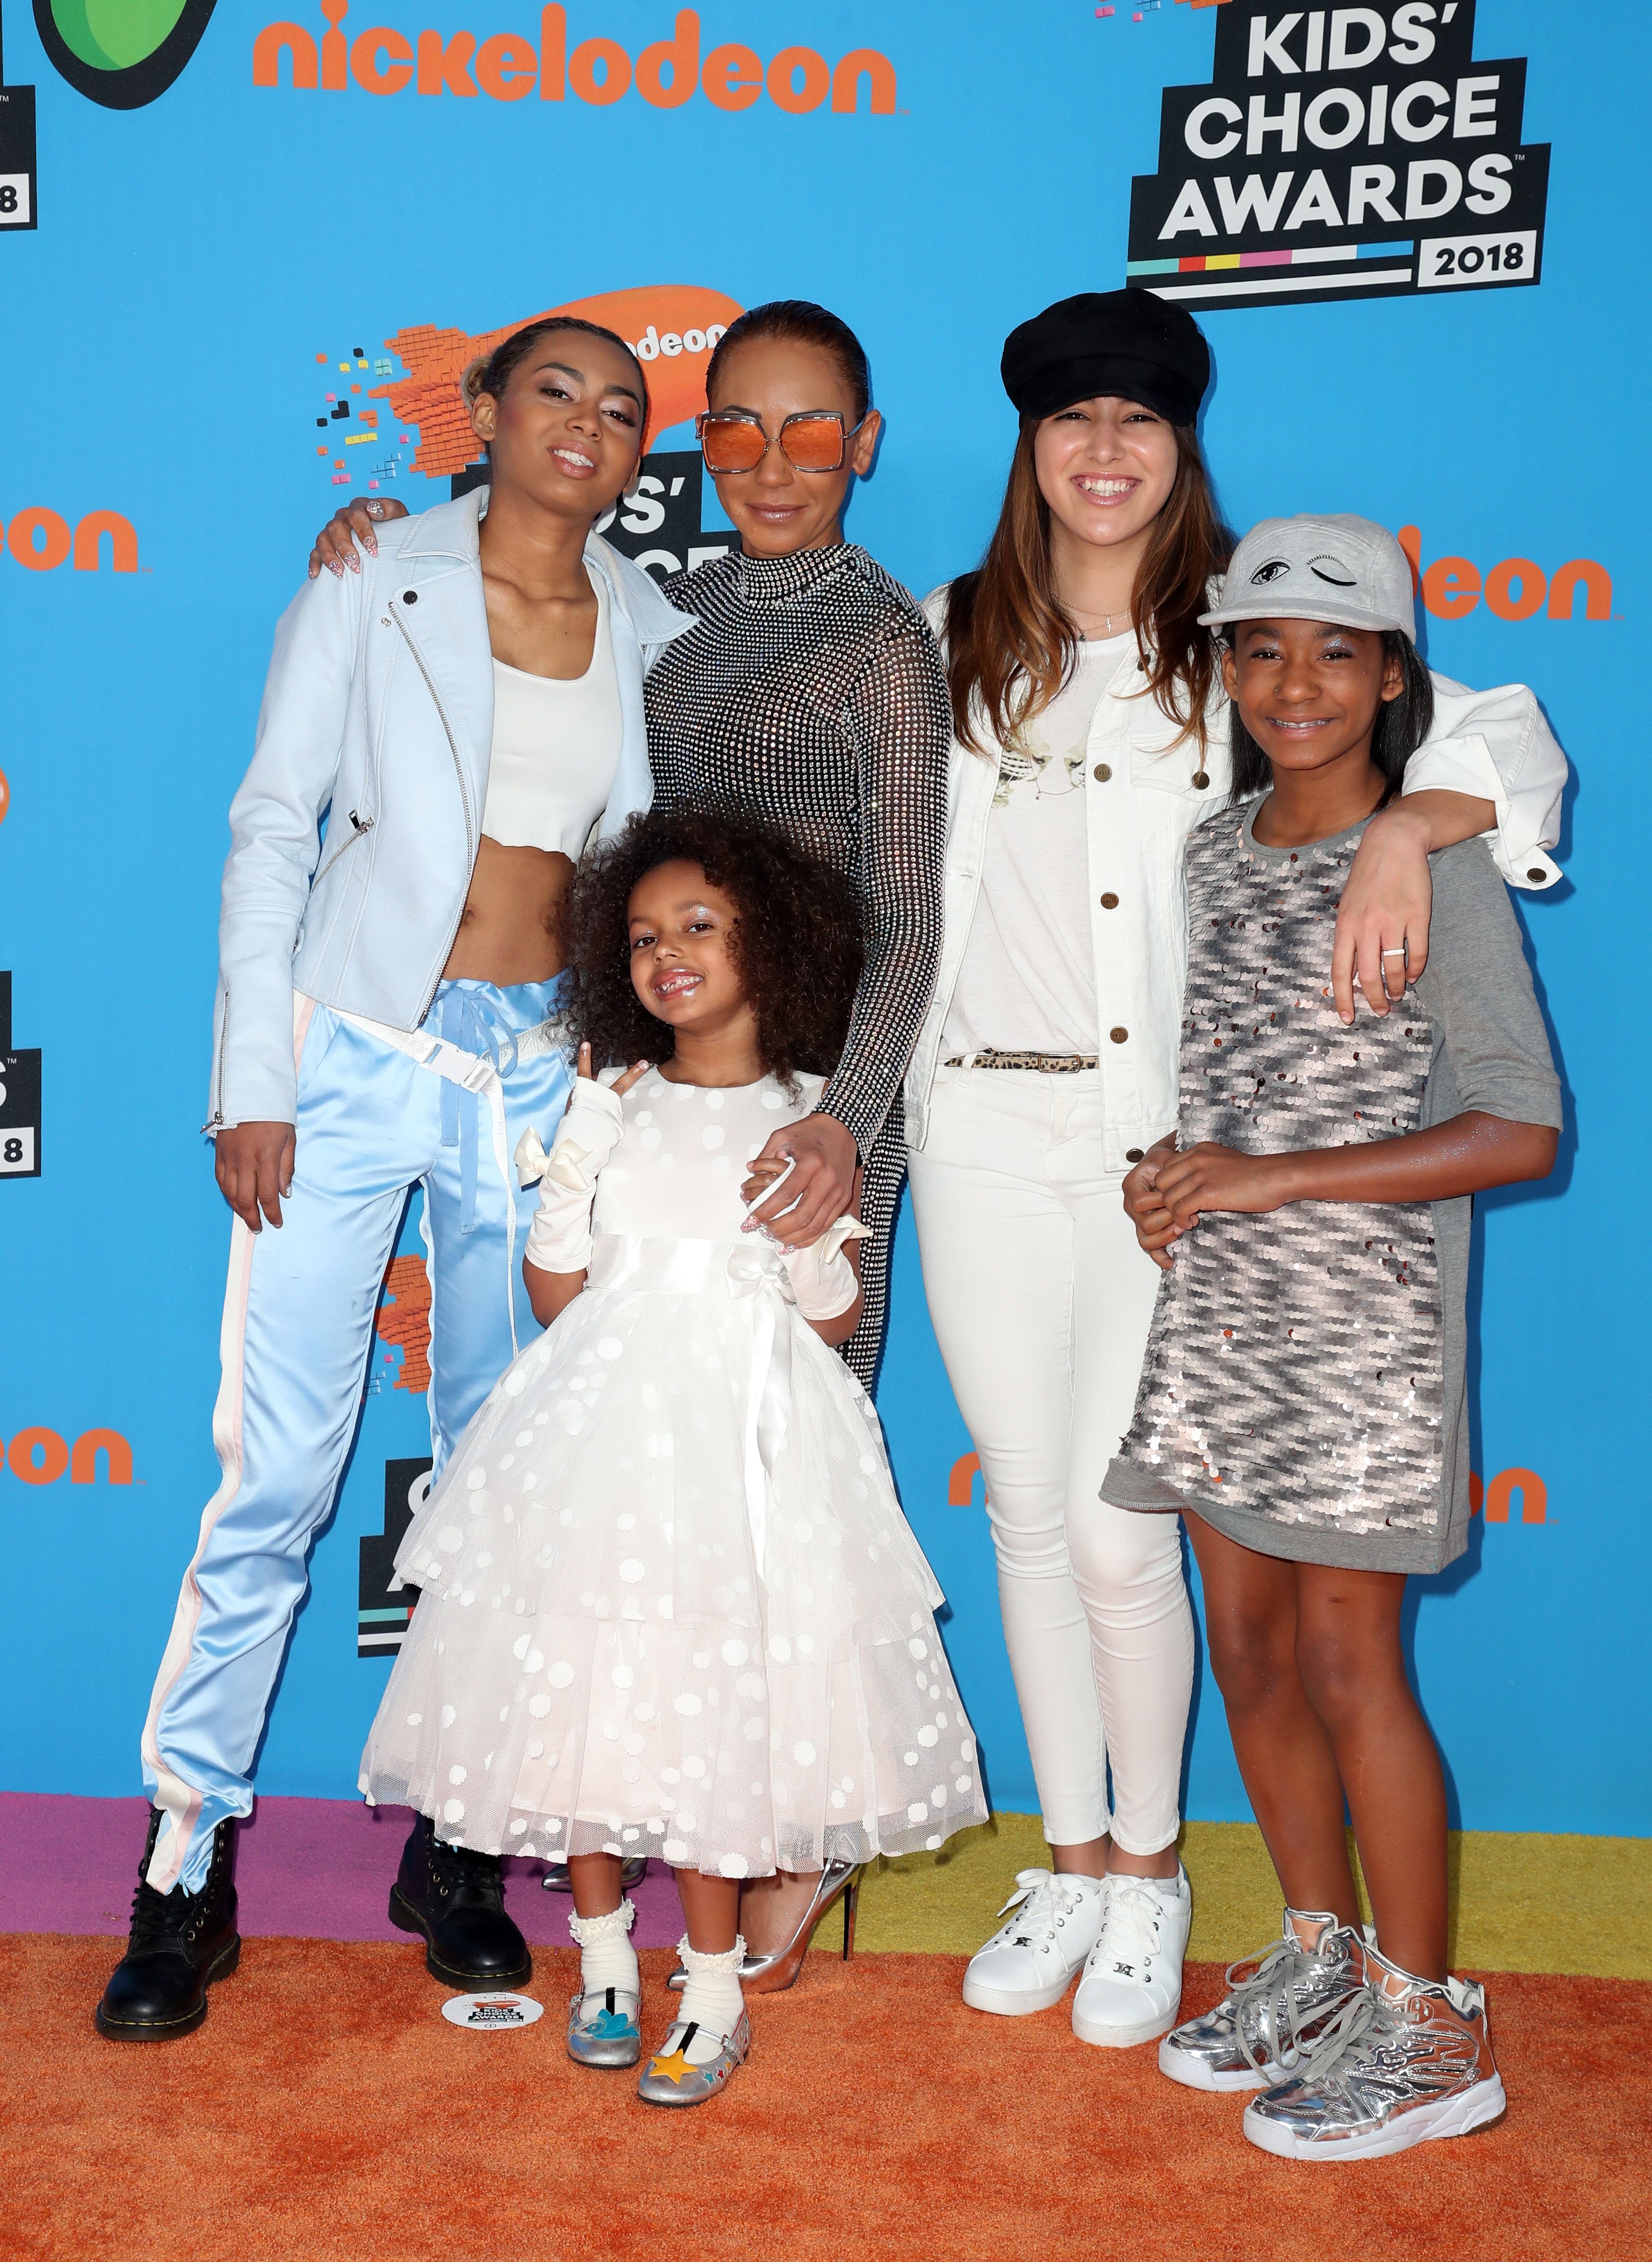 Mel with her kids, and Stephen’s daughter Giselle in 2018